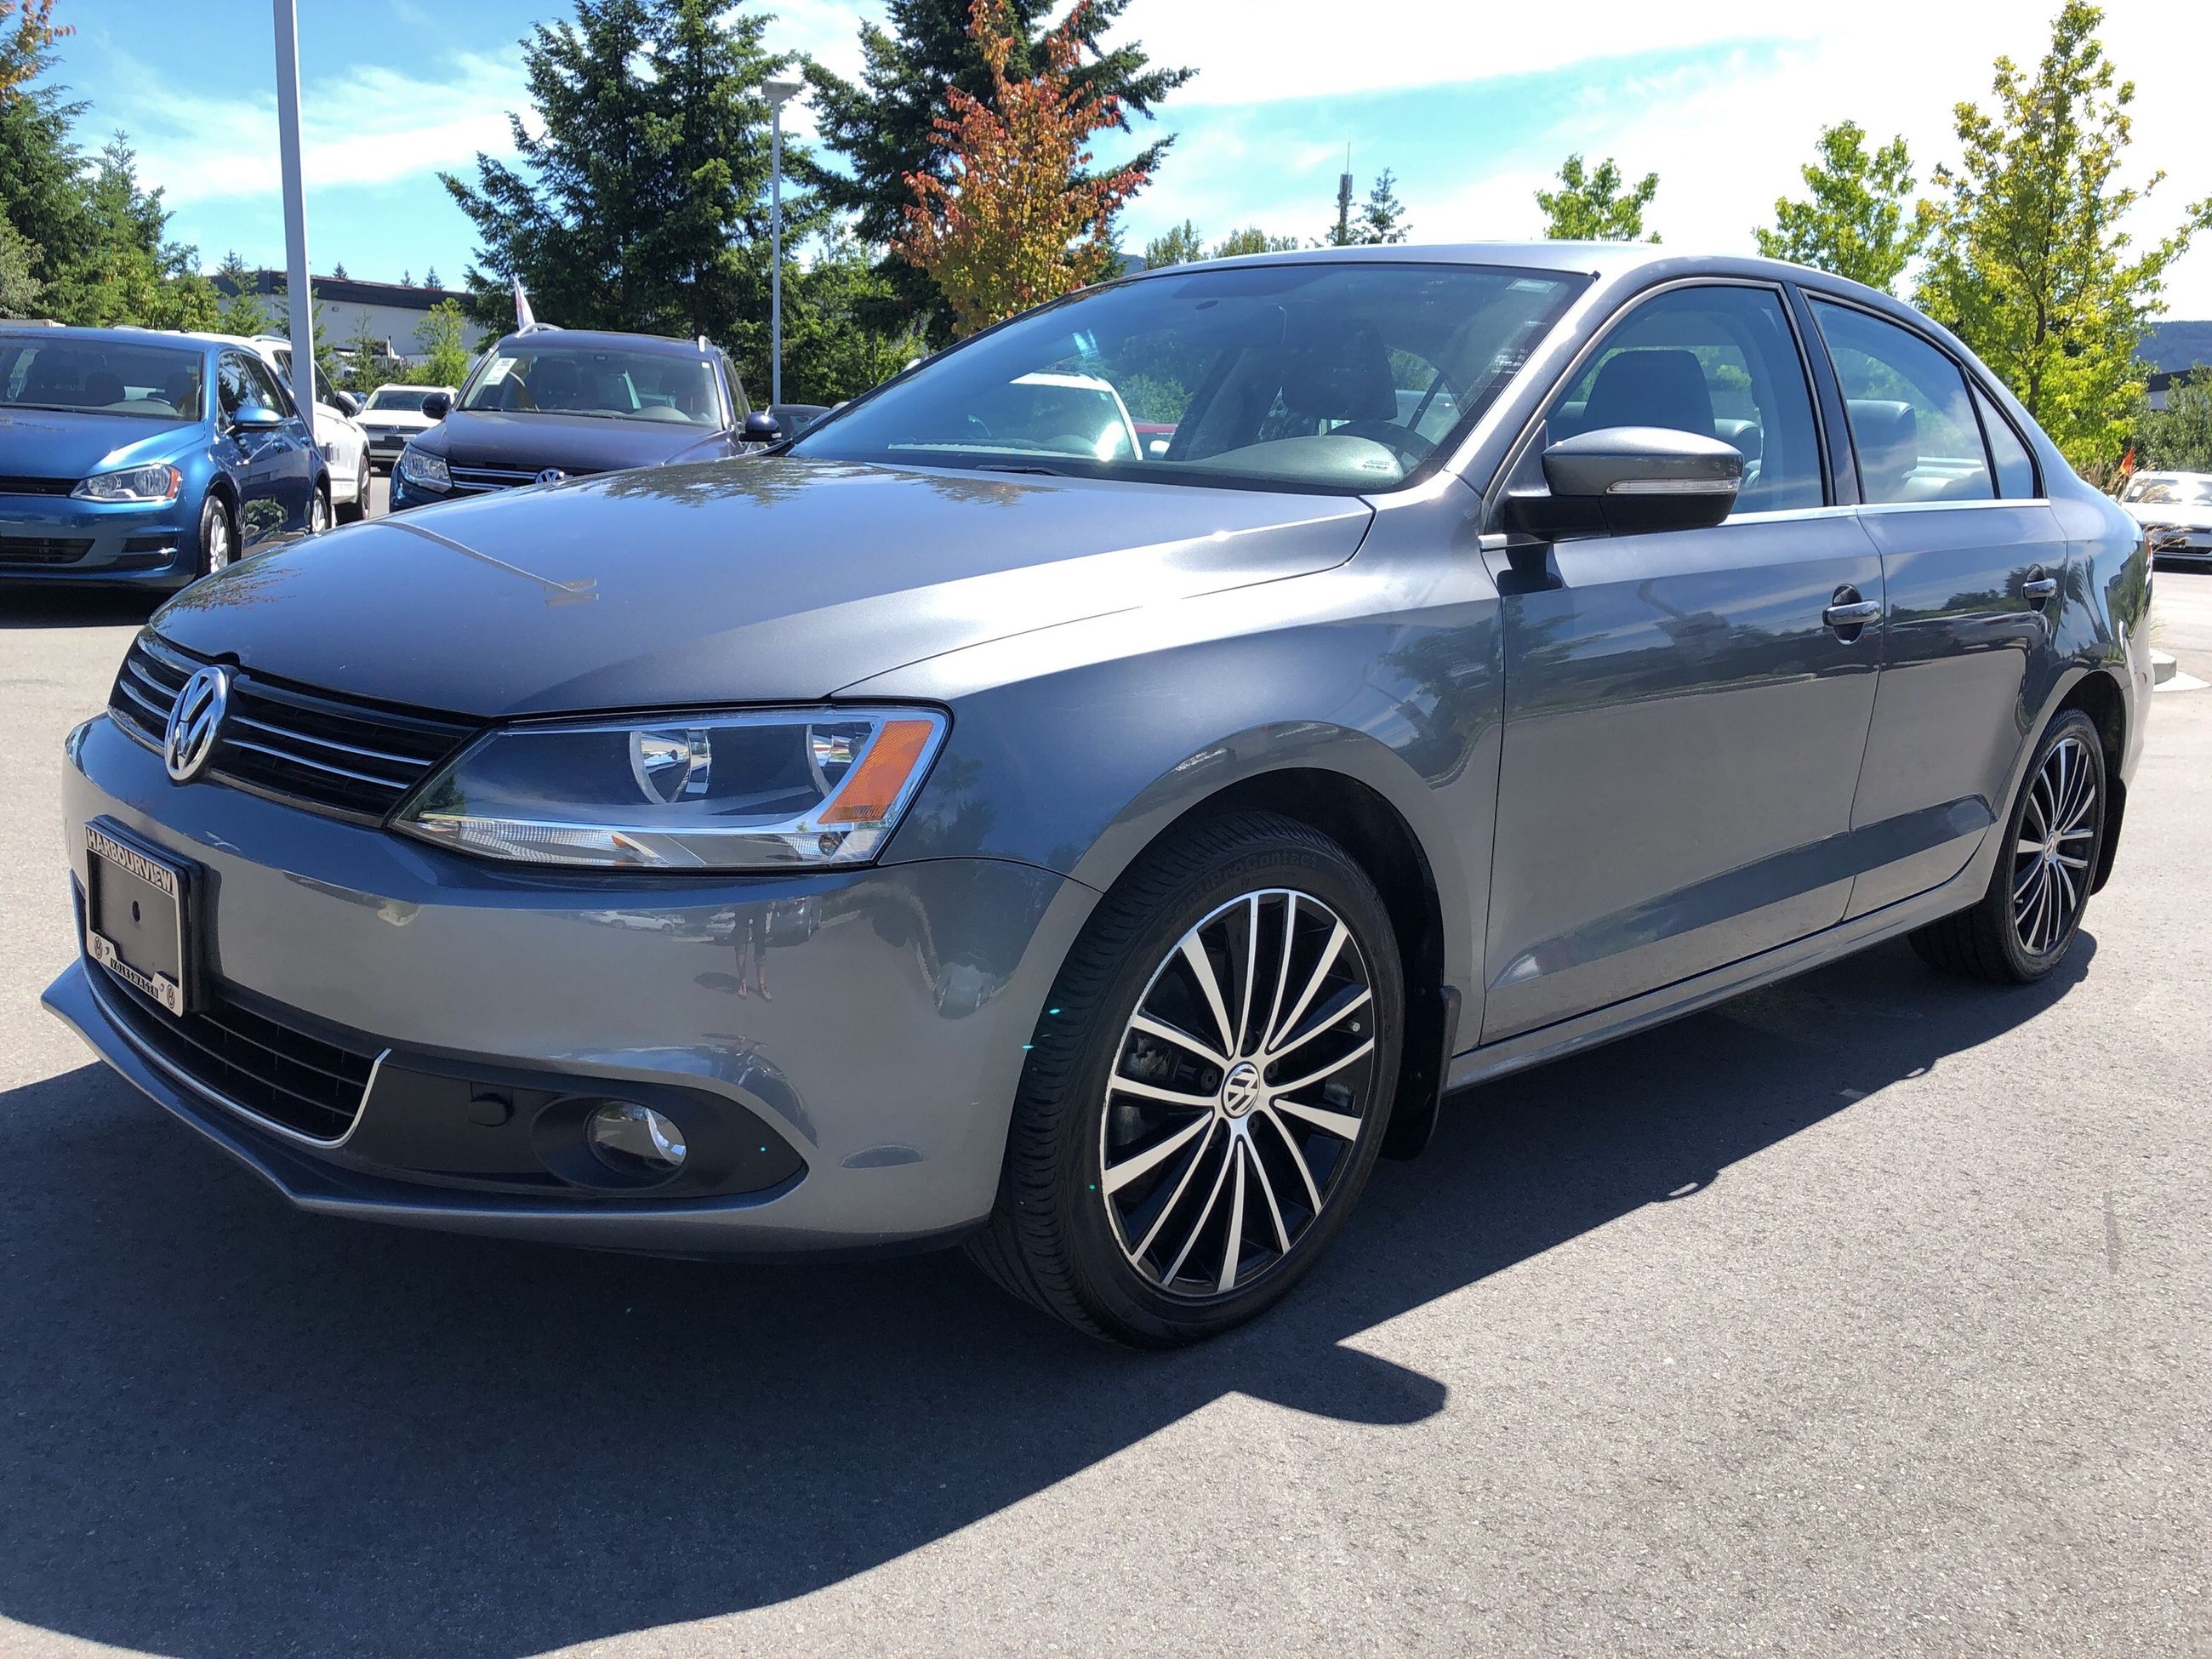 Used 2013 Volkswagen Jetta Highline Auto for Sale - $14995 | Harbourview VW